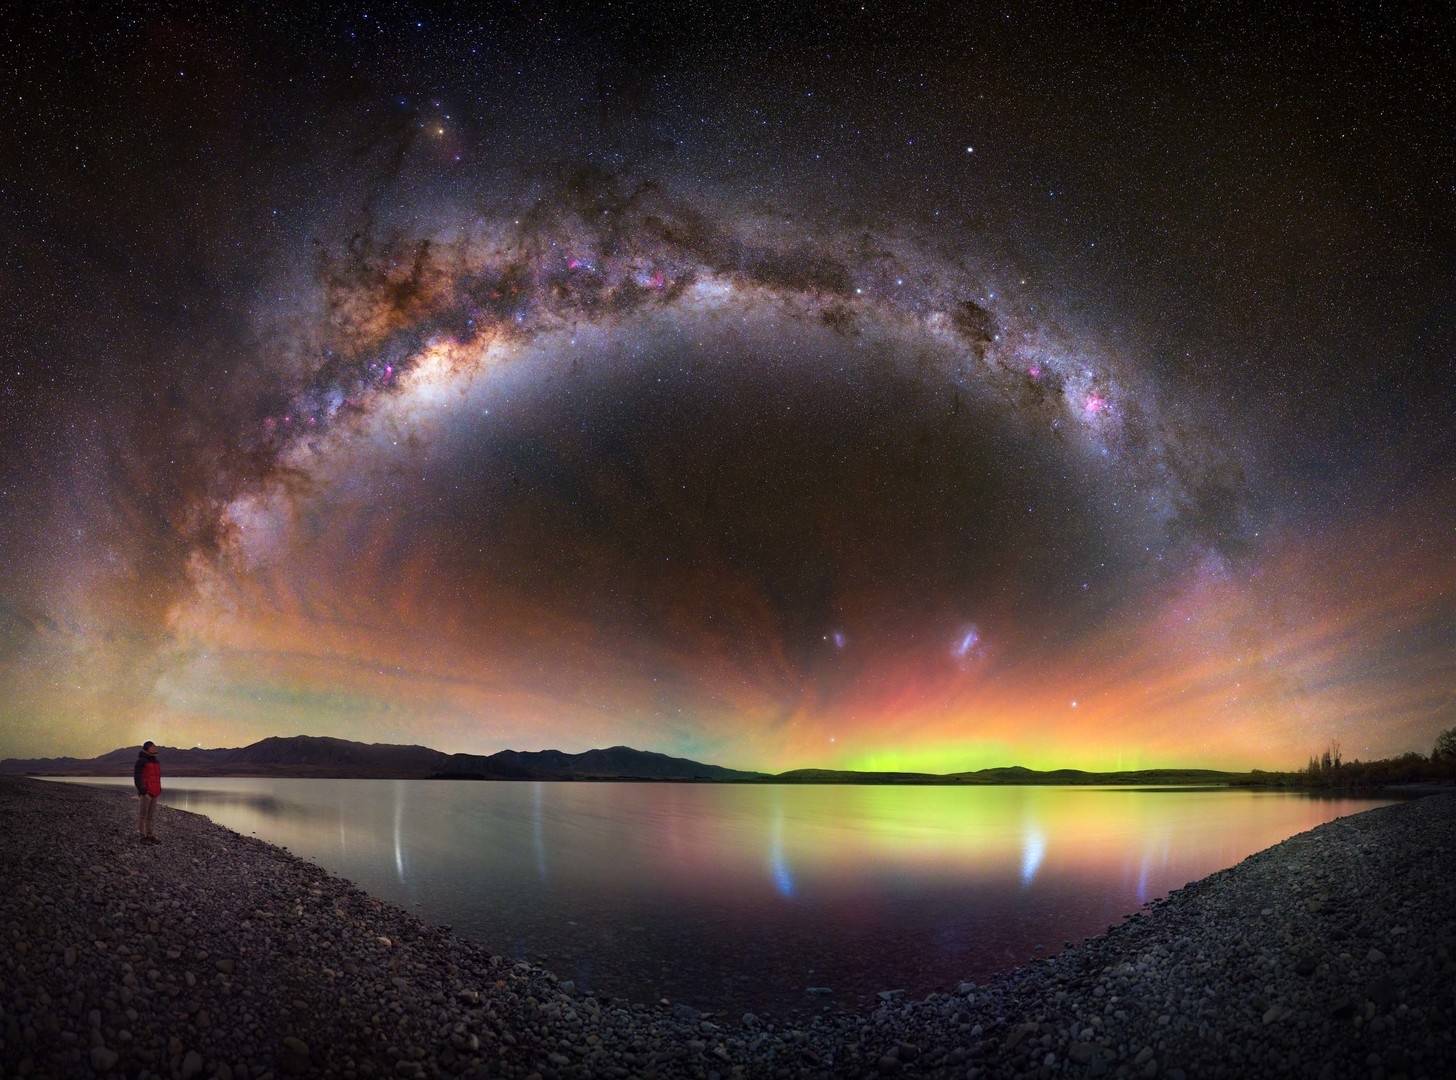 Milky Way arc framing an aurora and airglow at the same time